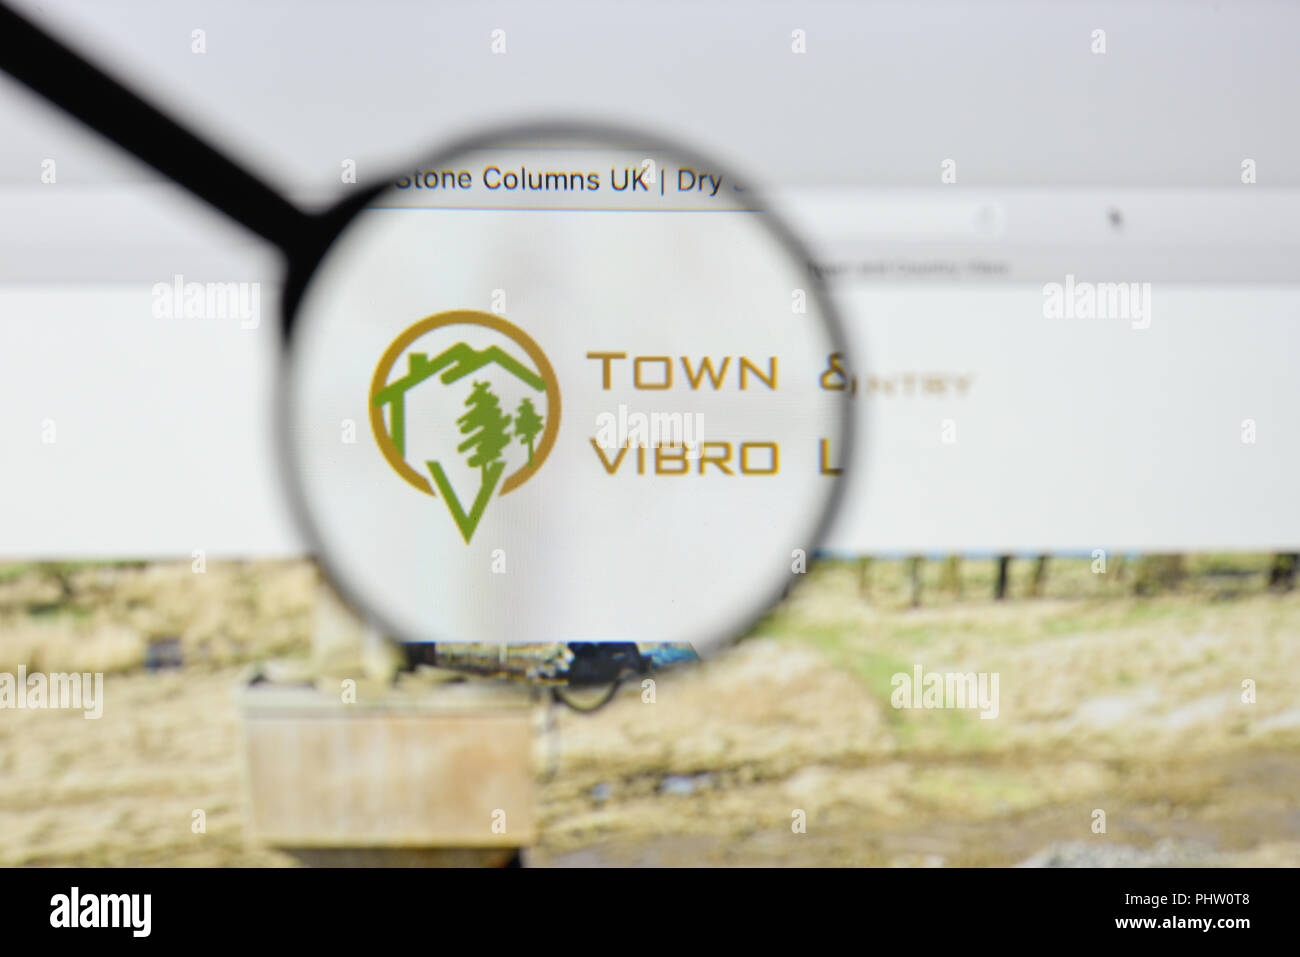 Milan, Italy - August 20, 2018: Town and Country Vibro website homepage. Town and Country Vibro logo visible. Stock Photo